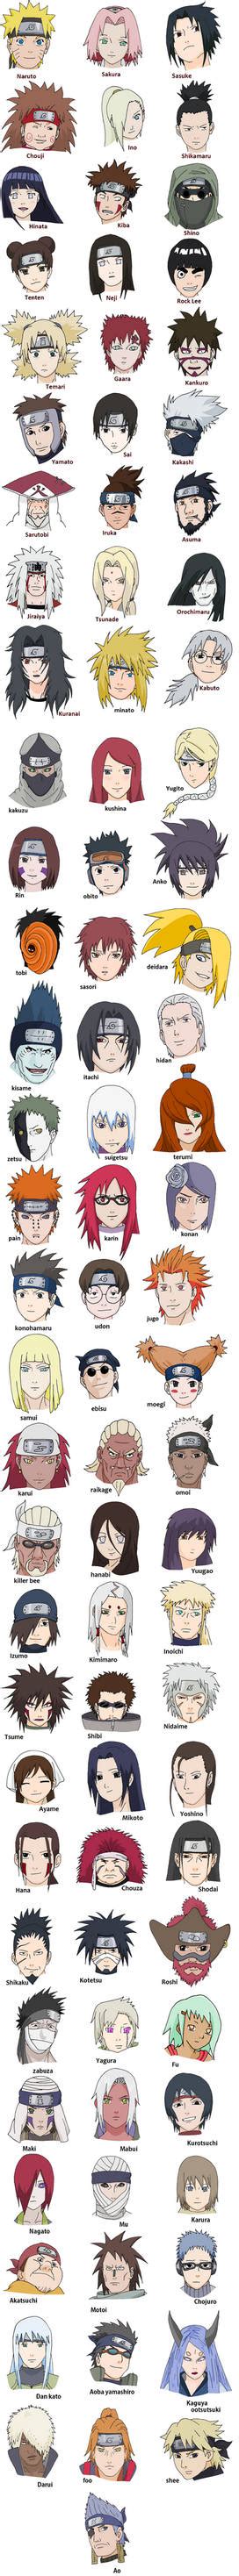 Naruto Characters And Names By Misssonia1 On Deviantart